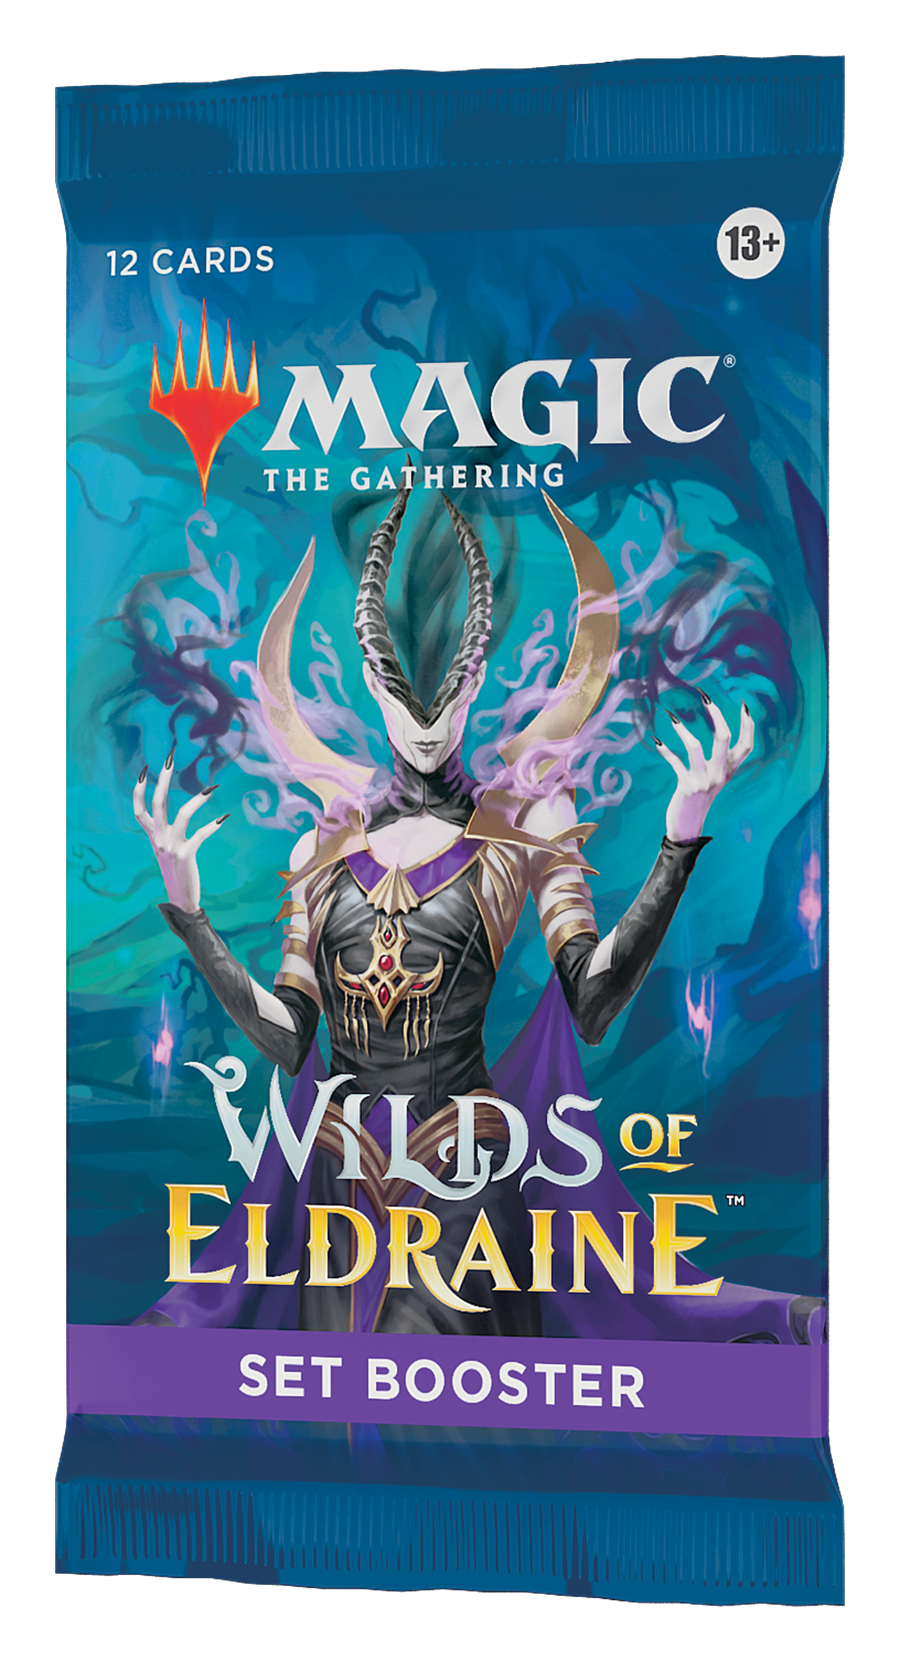 Magic: The Gathering Wilds of Eldraine Set Booster (12 Magic Cards)